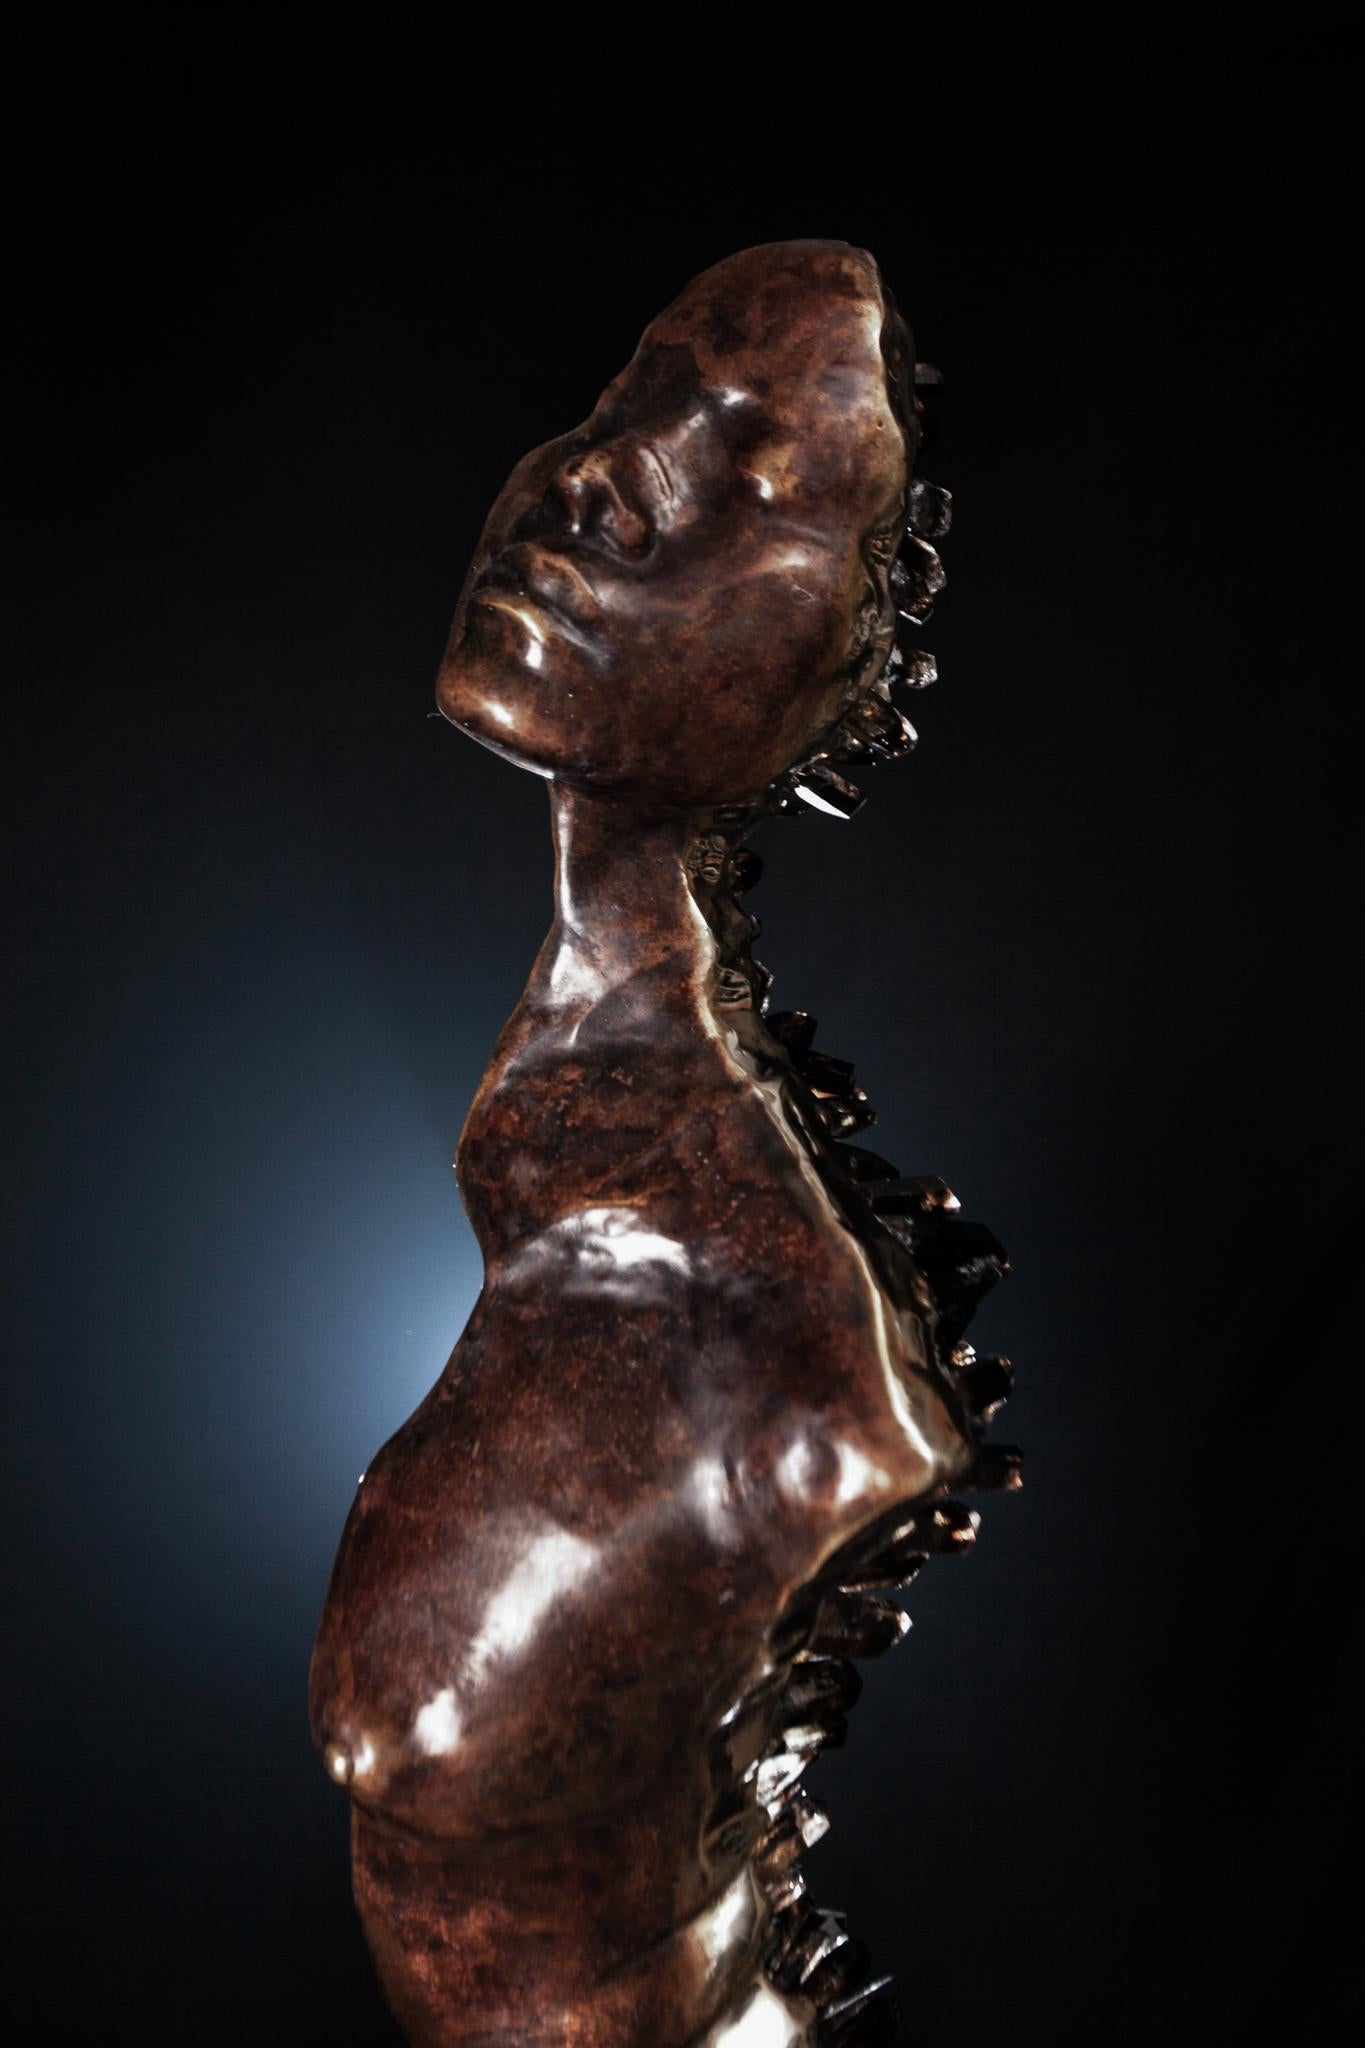 The sculpture is patinated bronze with naturally occurring smokey quartz crystals. 

Unique edition.
Half torso.

The cementitious pedestal base is unique and hand-made in the artists' studio under the watchful eyes of the artist.

The artist is